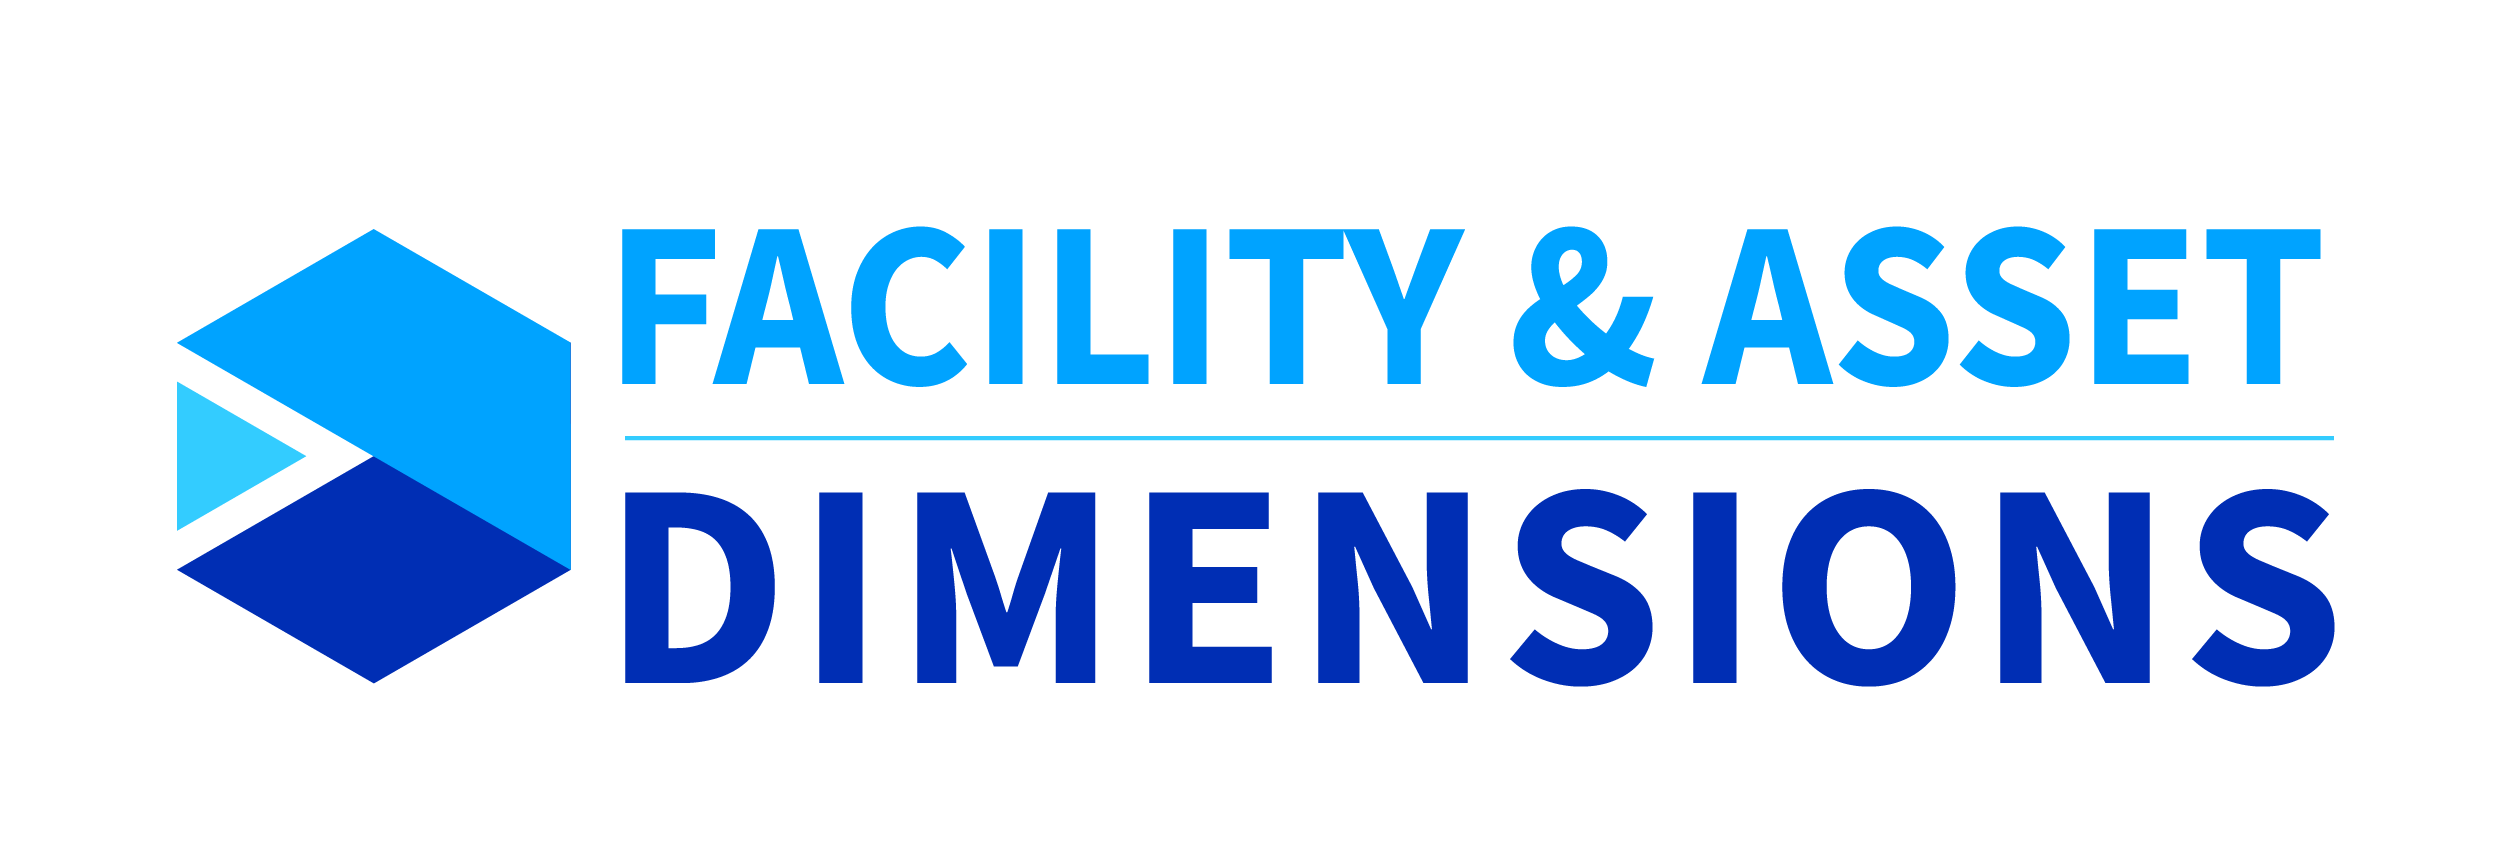 Facility and Asset Dimensions - Acceltech Pte Ltd